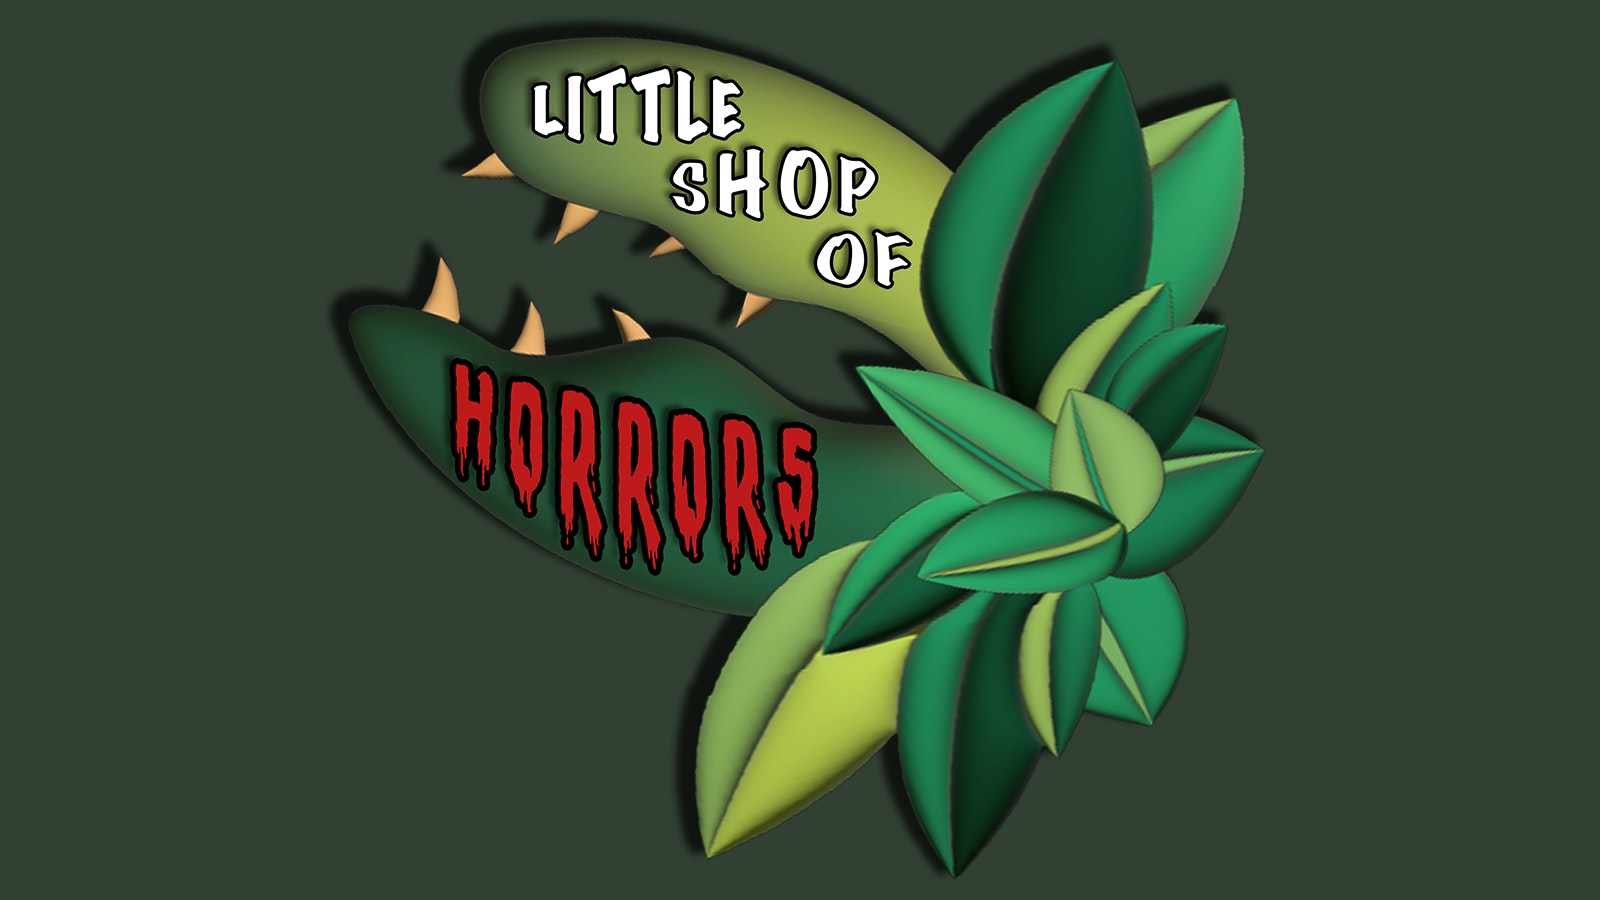 Almost Famous Presents: Little Shop of Horrors